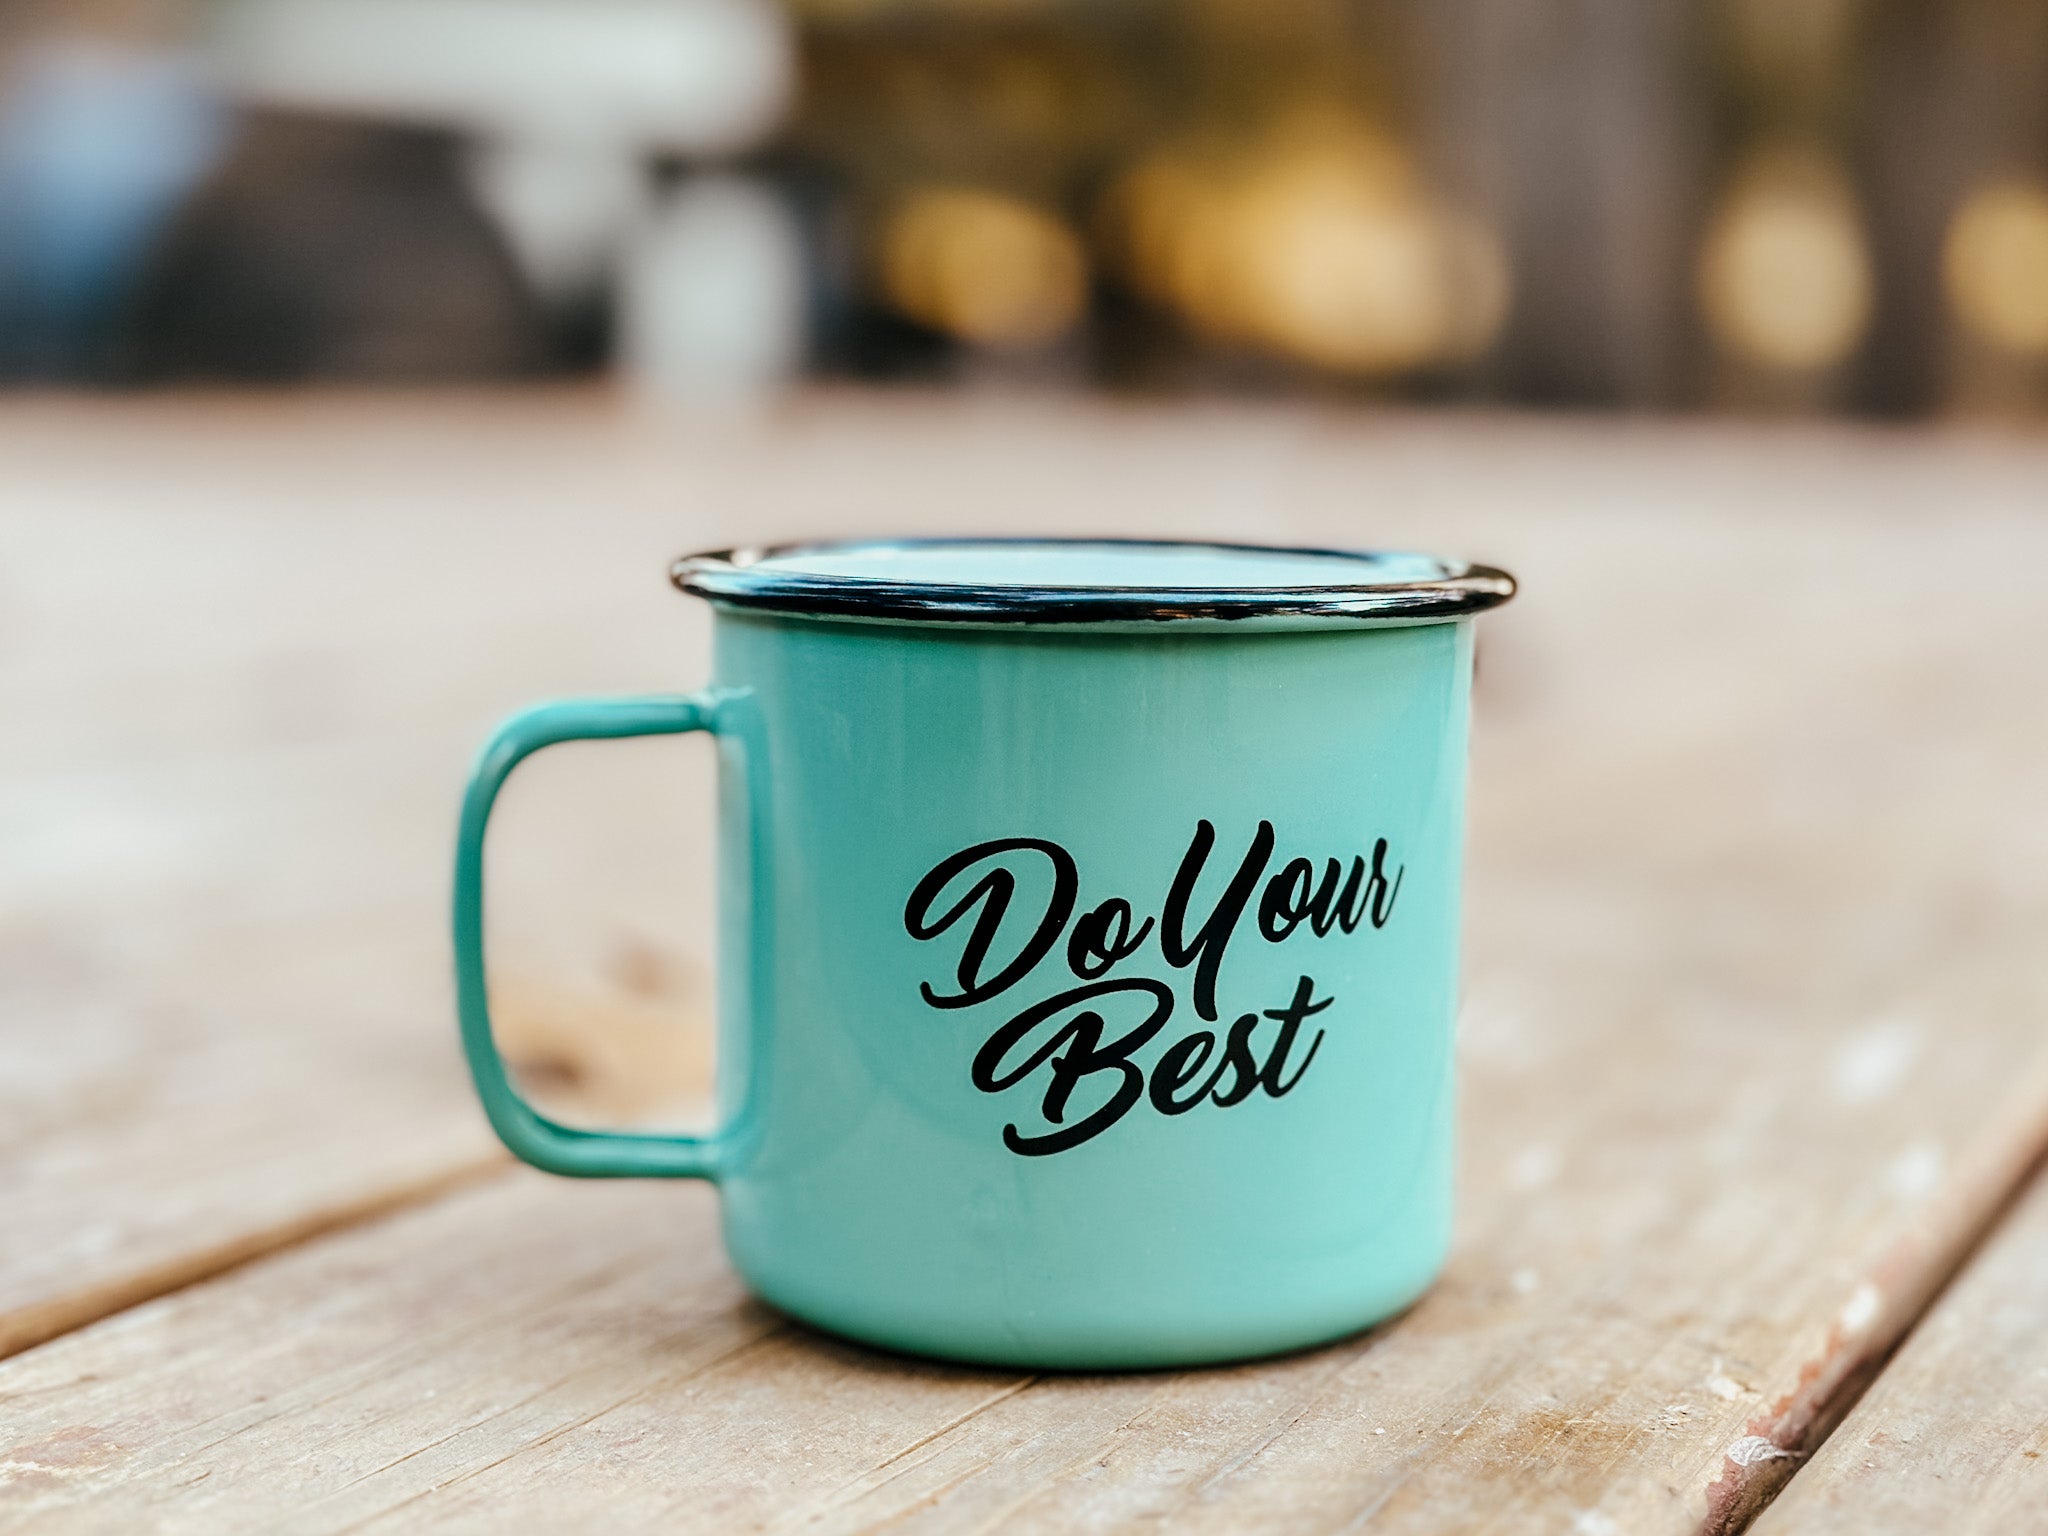 Stay Green Coffee Cup - Unique 12 step recovery themed coffee mugs and gifts